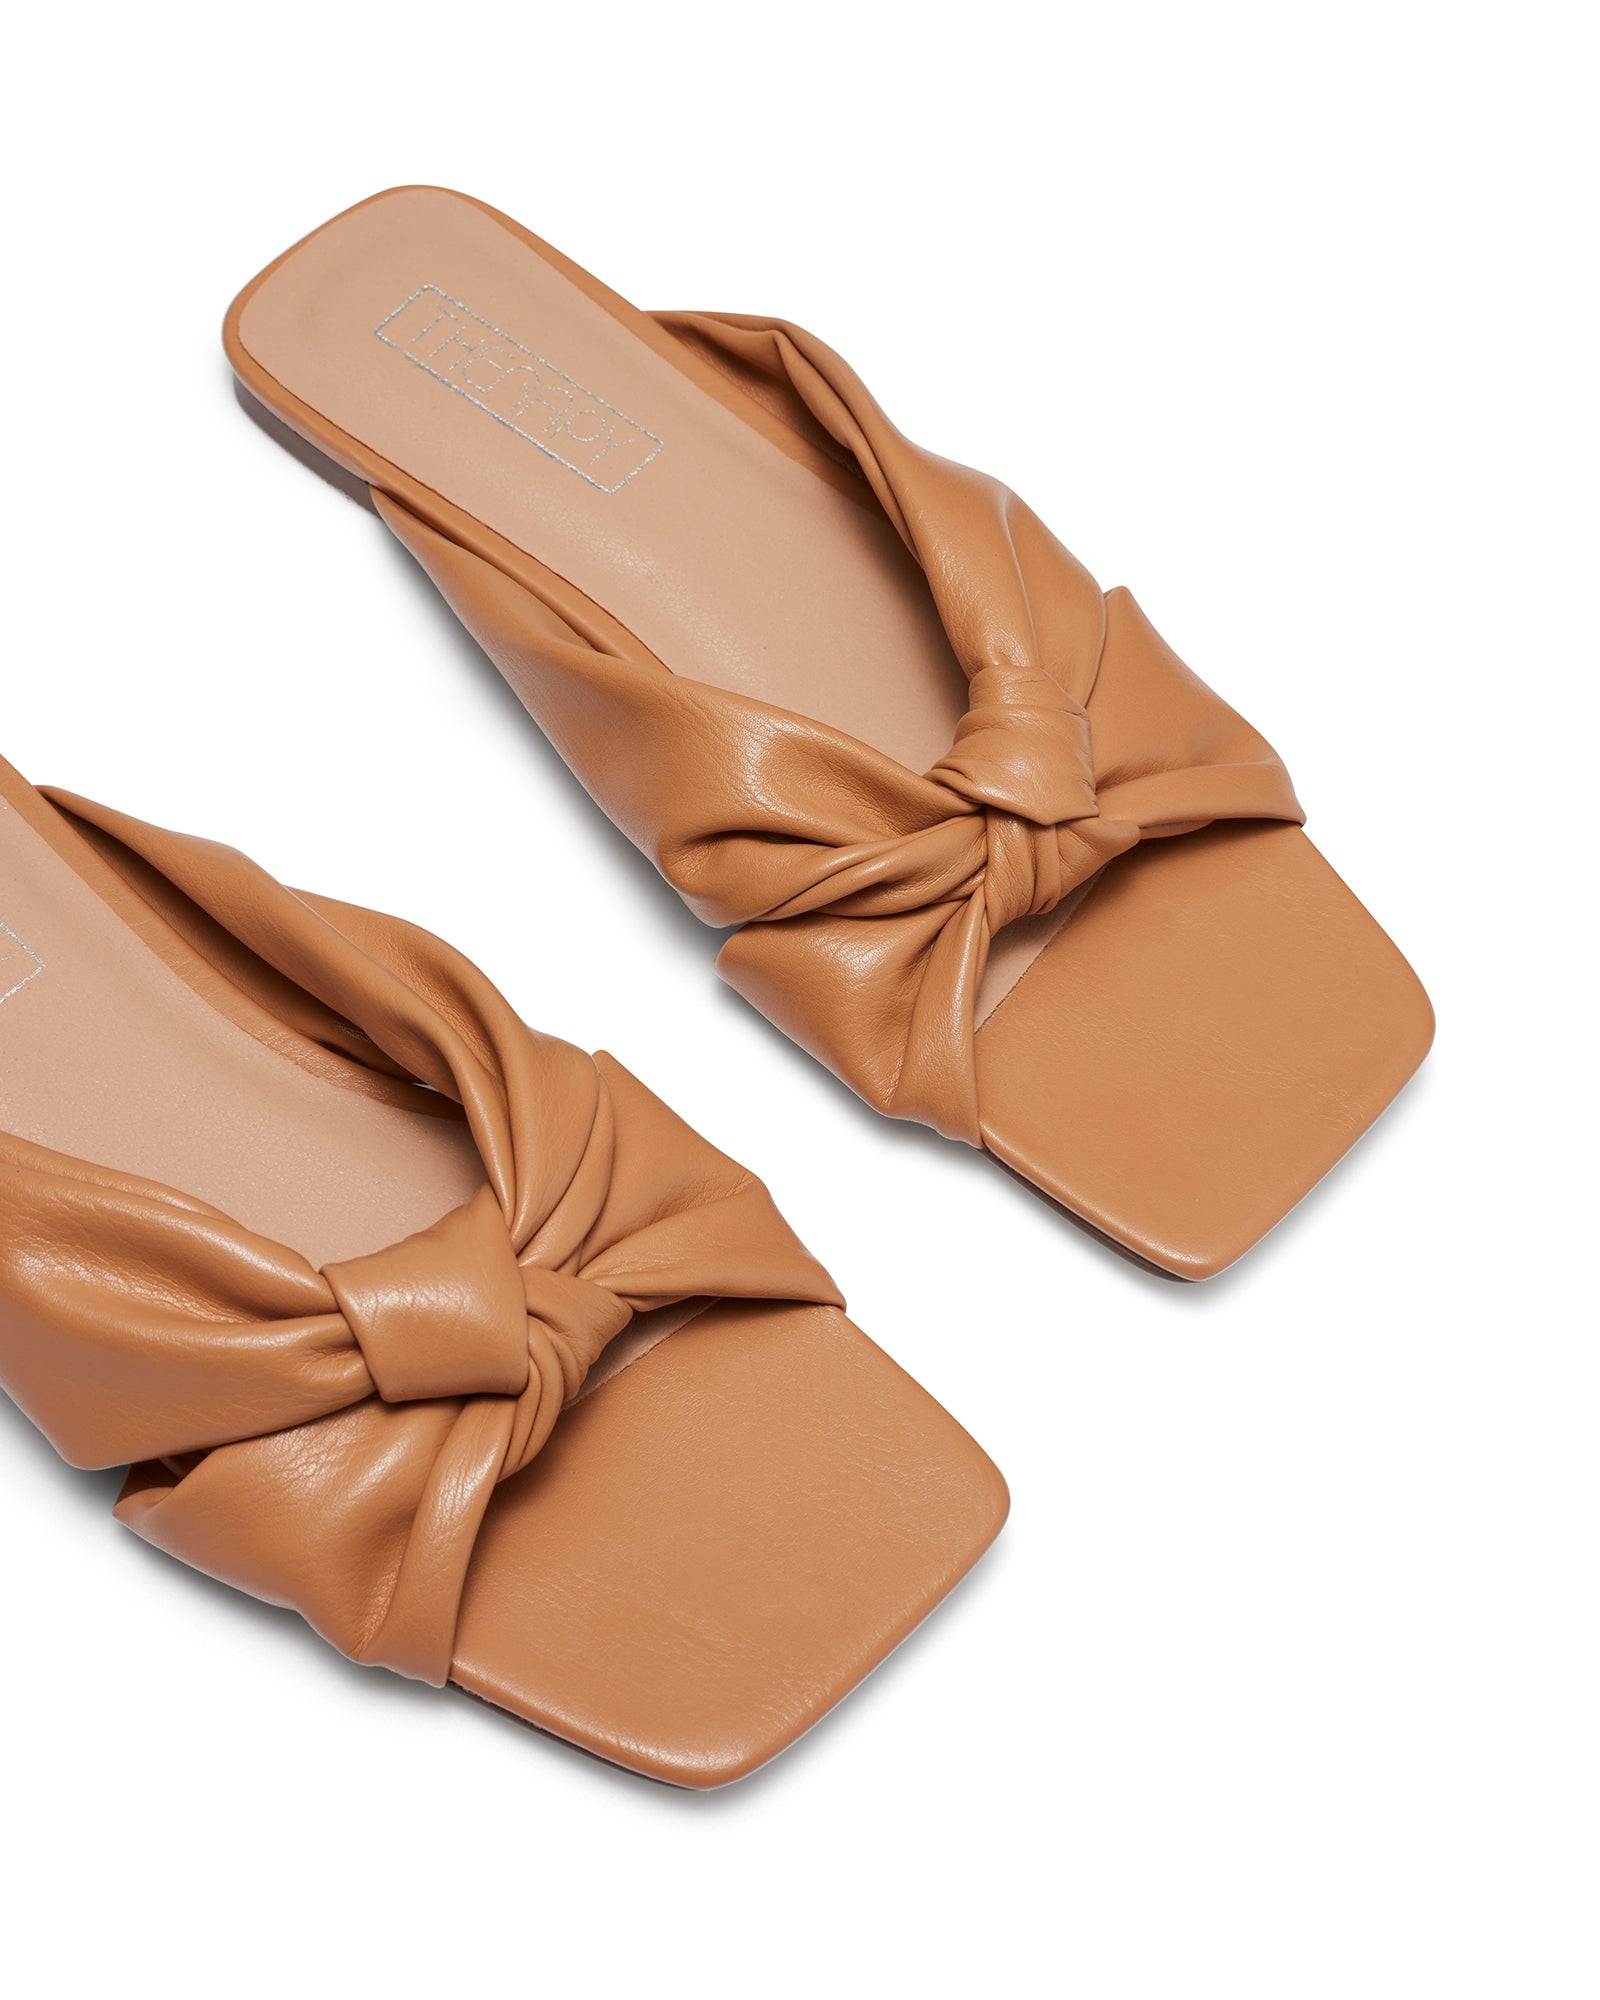 Therapy Shoes Sofia Caramel | Women's Flats | Slides | Sandals | Knot